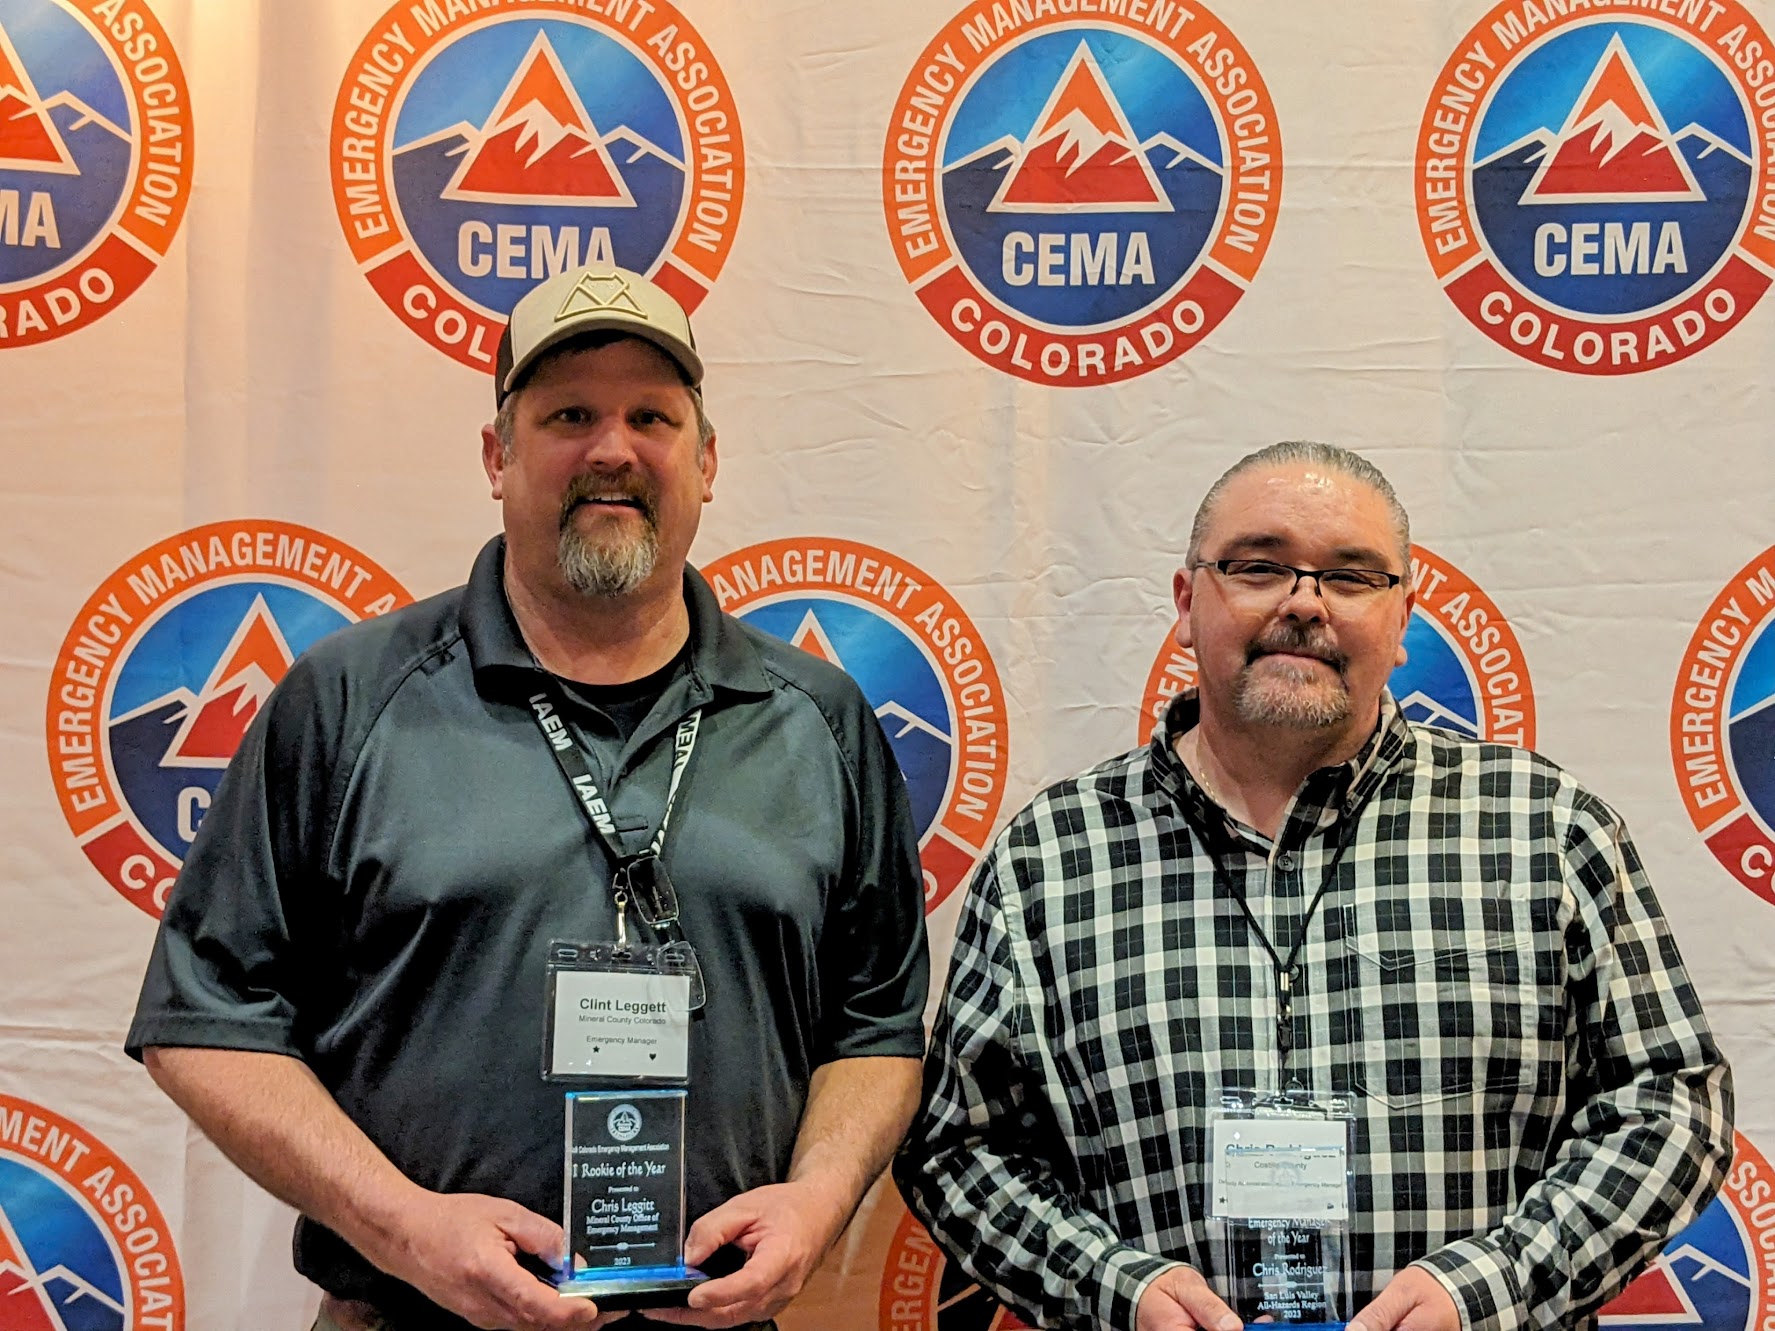 Clint Leggett (Left), Rookie of the Year & Chris Rodriguez, SLV Emergency Manager of the Year in a Historic Achievement as a Three-Time Honoree.